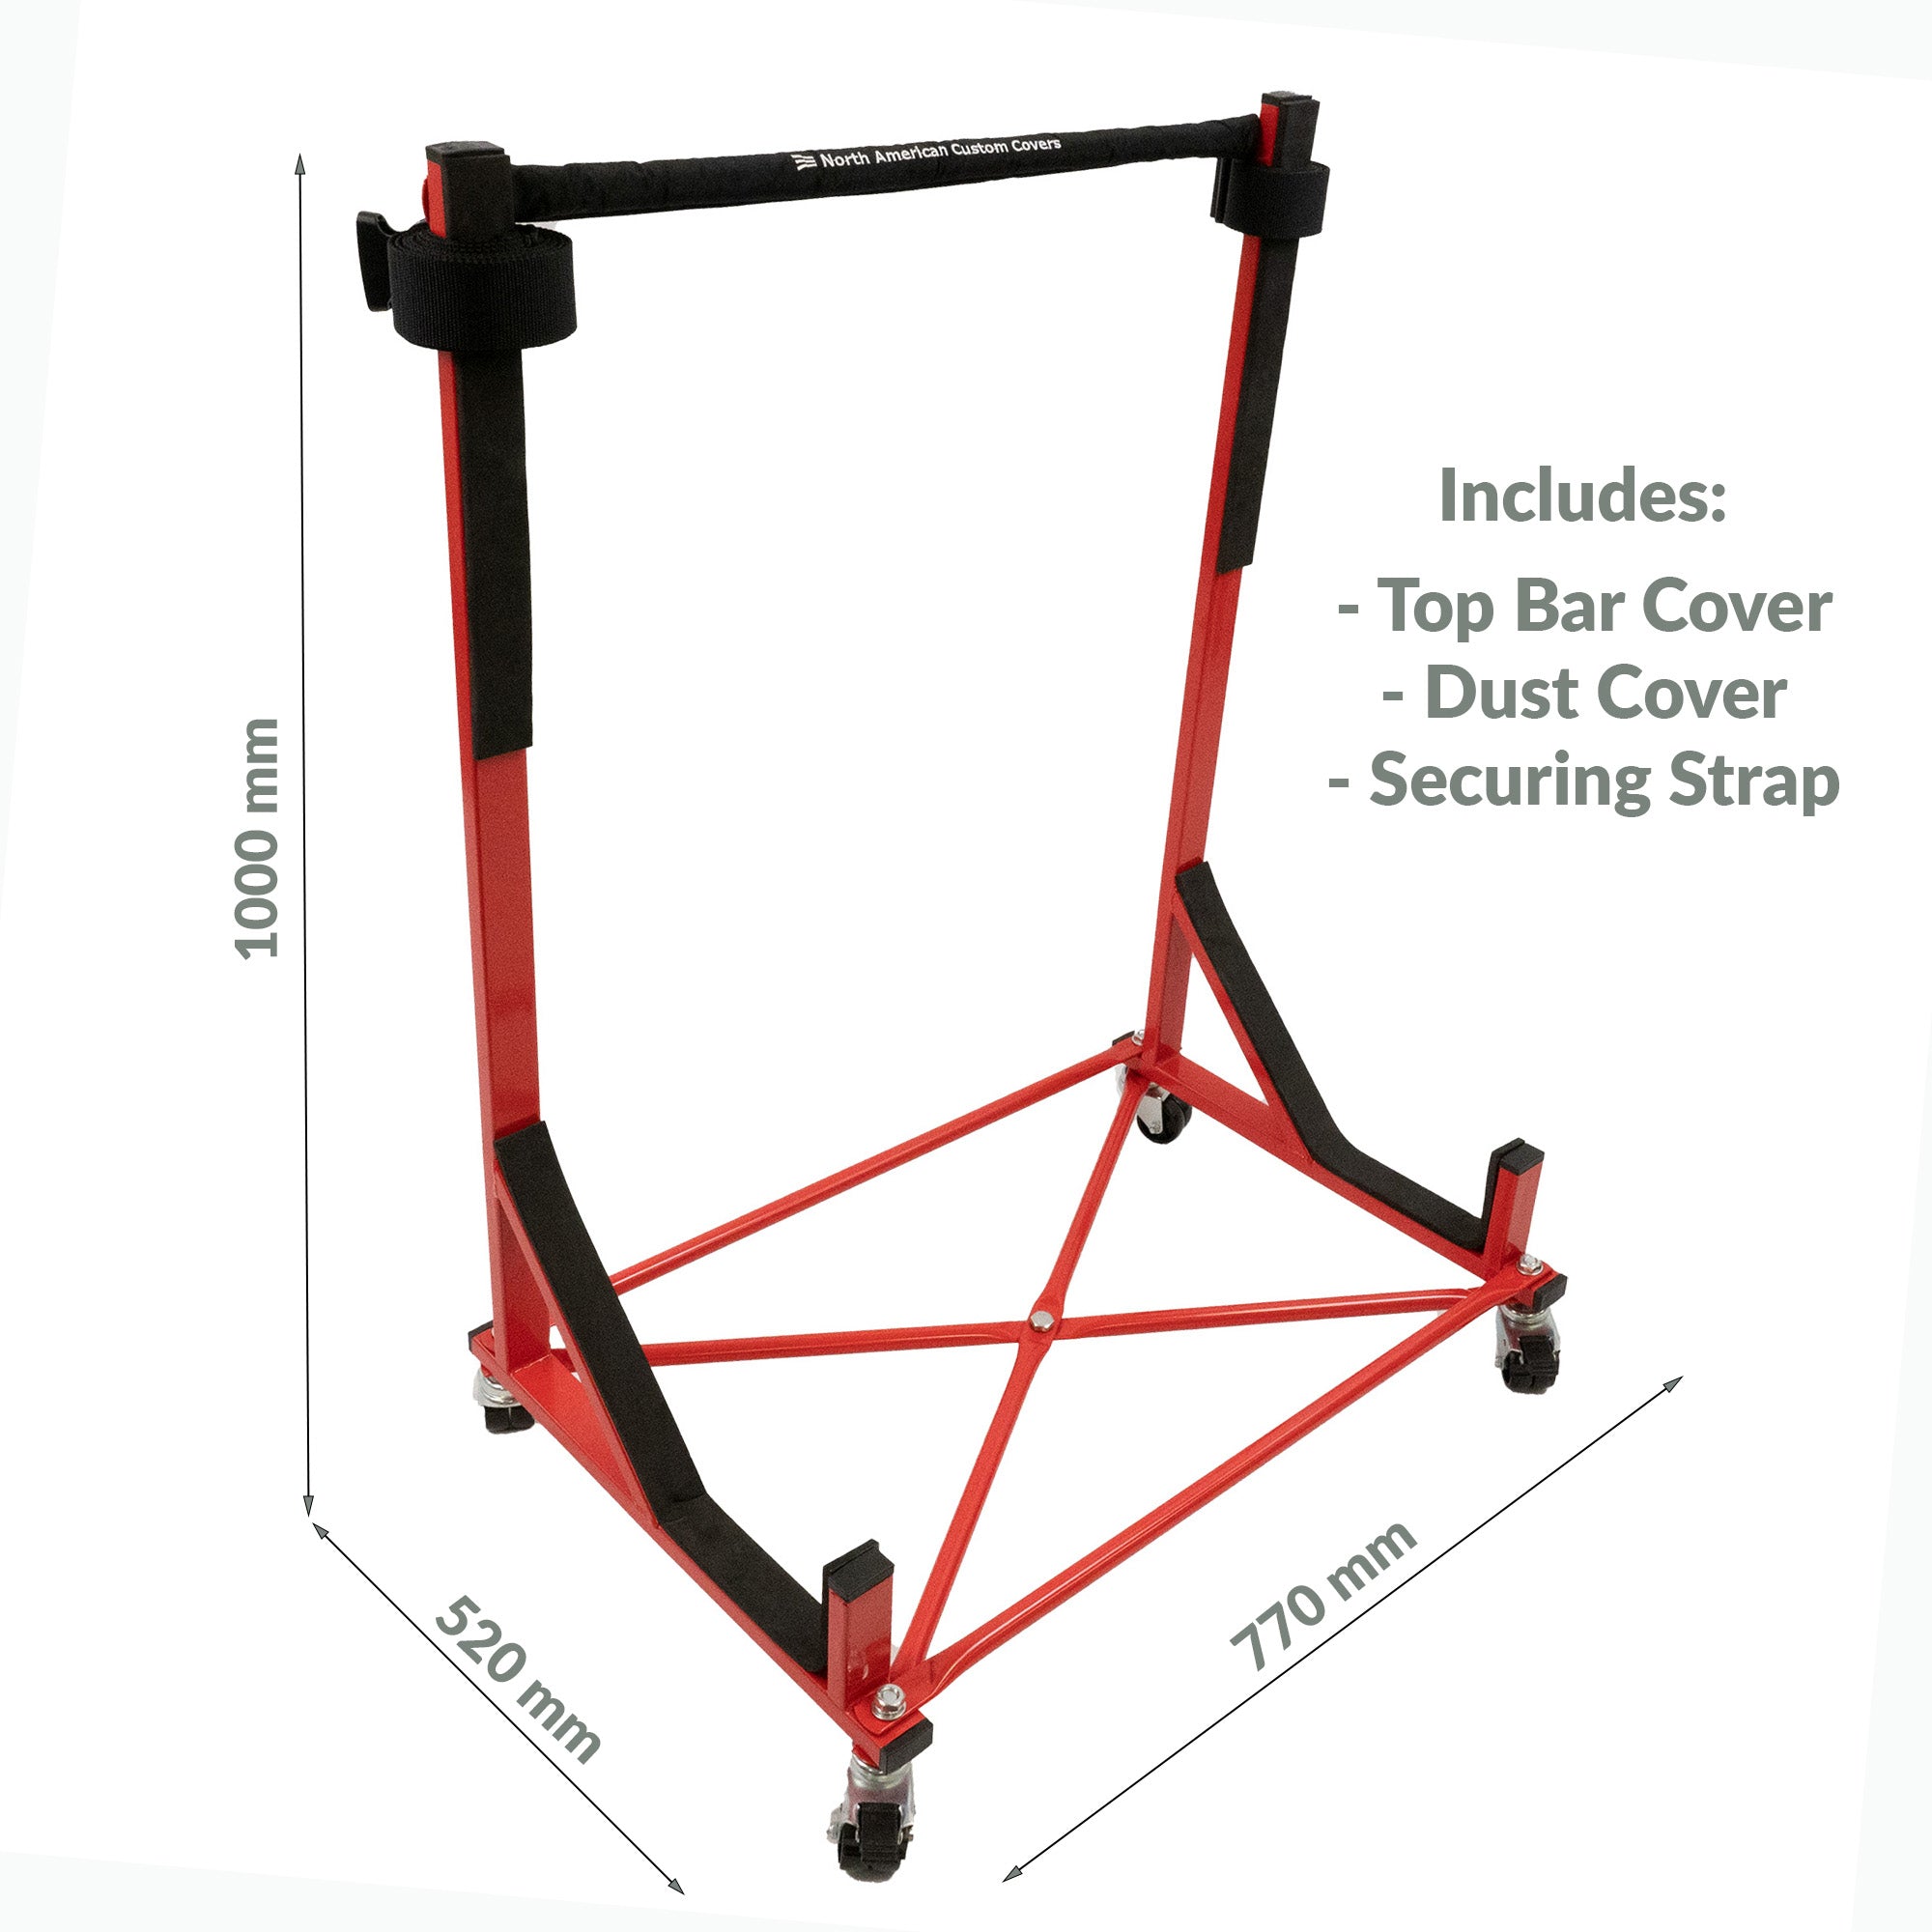 BMW Z4 Heavy-duty Hardtop Stand Trolley Cart Rack (Red) with Securing Harness and Hard Top Dust Cover (050R)